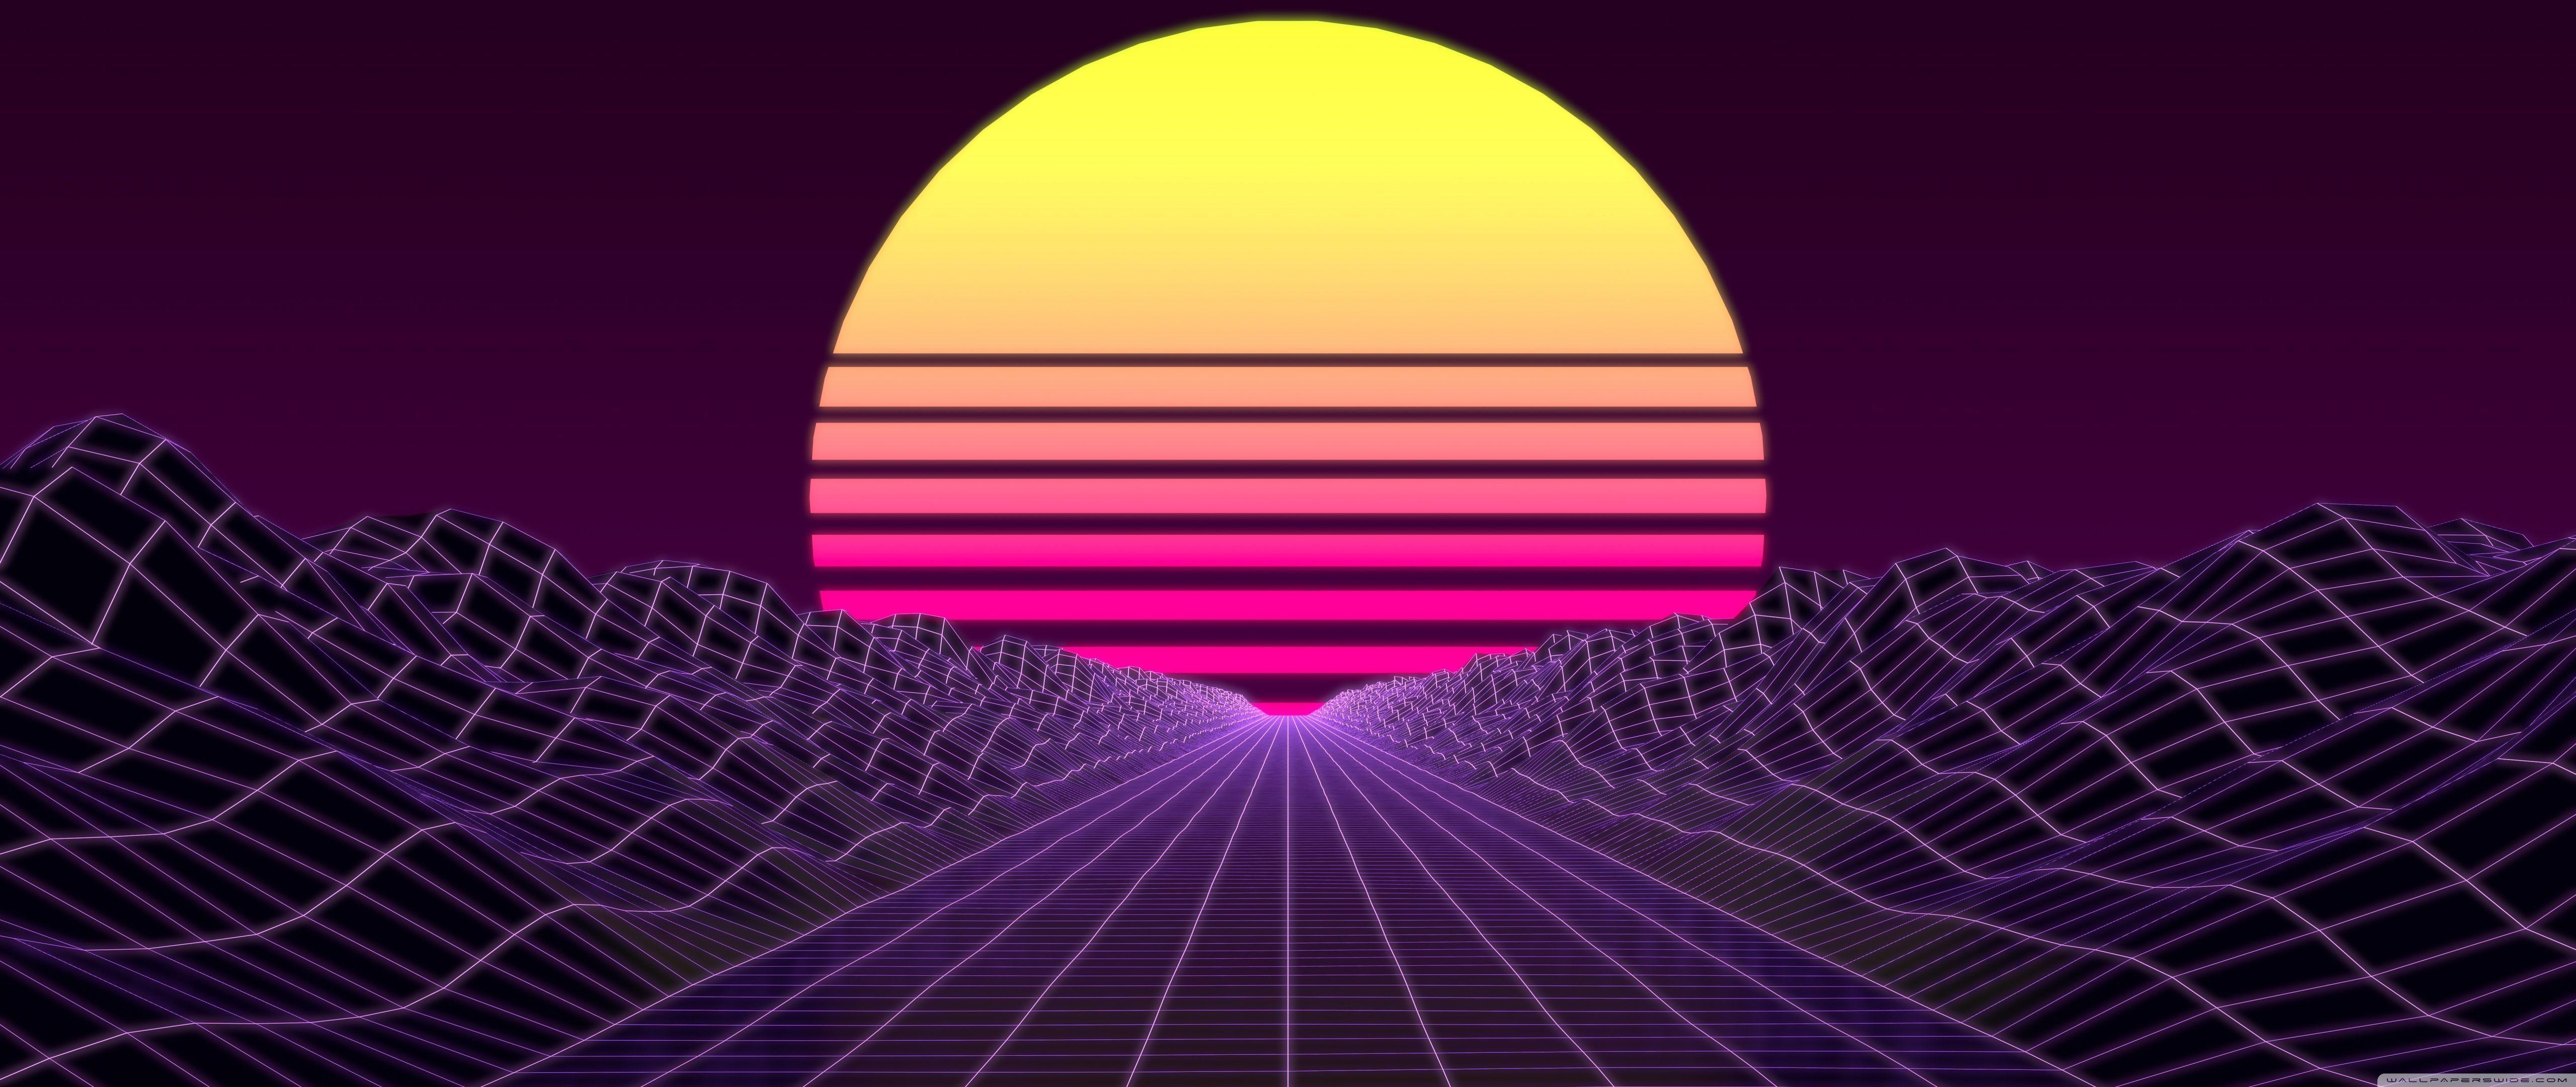 5120 x 2160 · jpeg - 4k Retro Synthwave Wallpapers - Wallpaper Cave